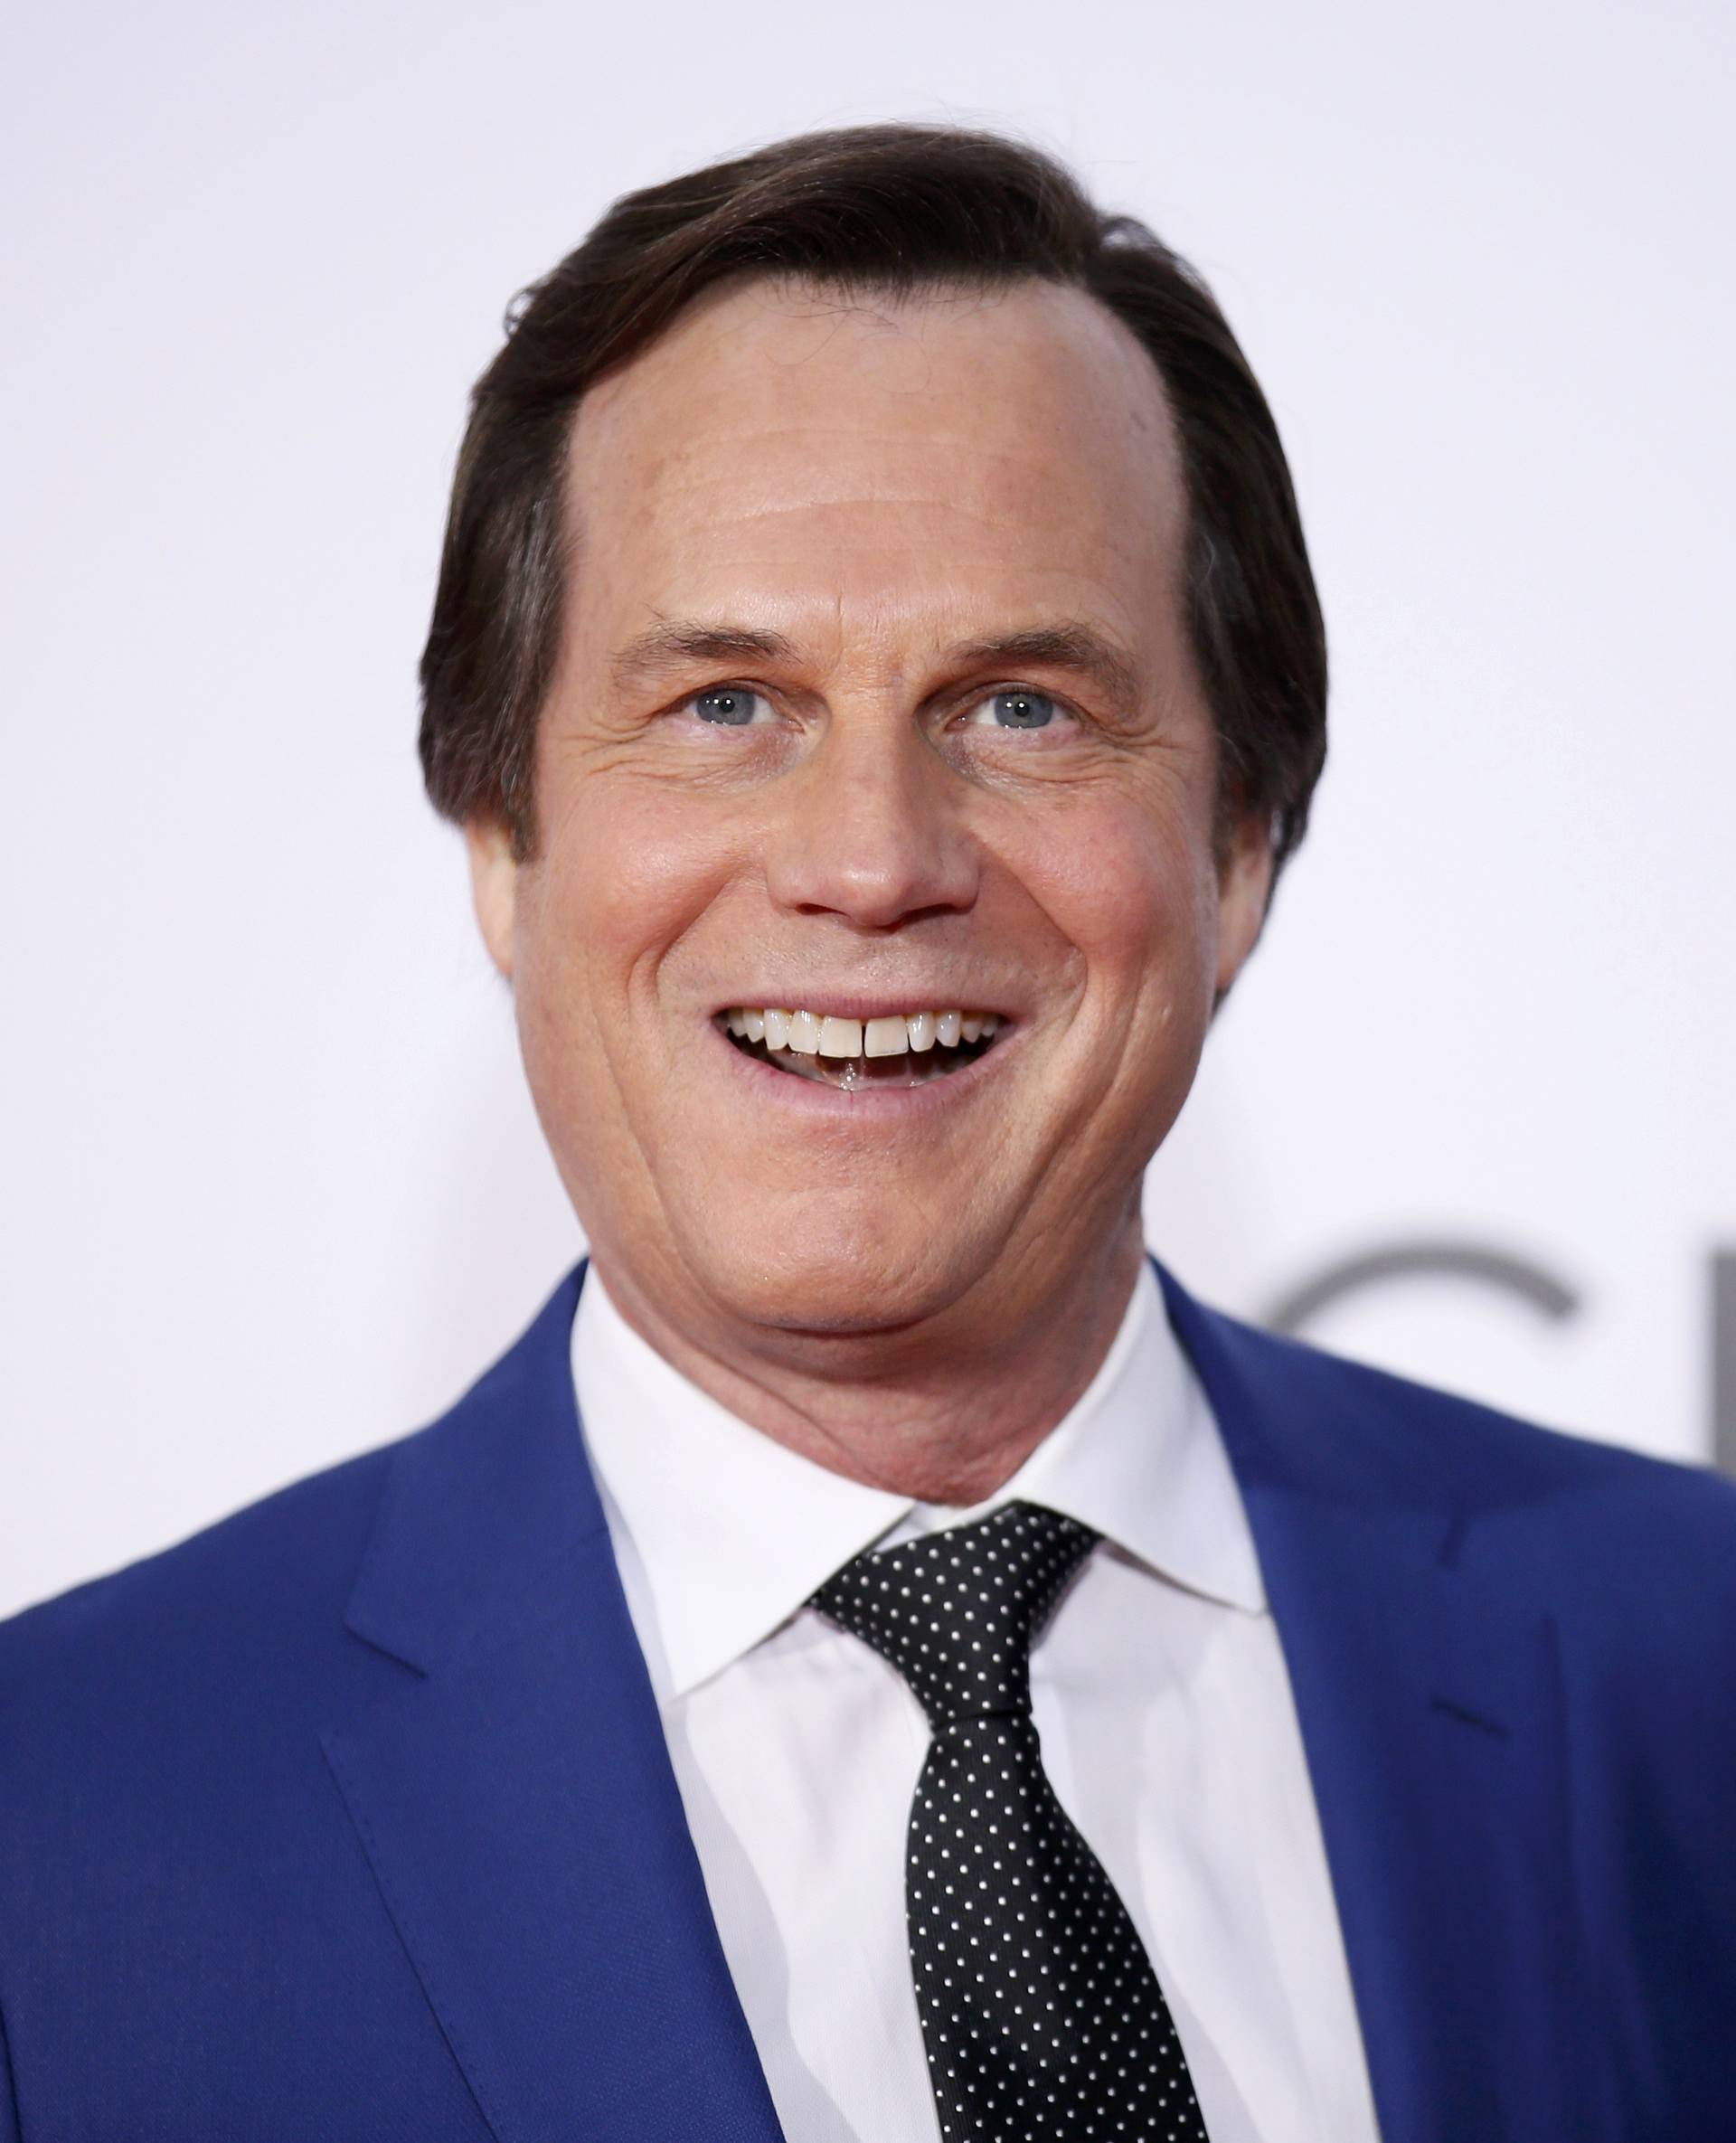 Actor Bill Paxton arrives at the People's Choice Awards 2017 in Los Angeles